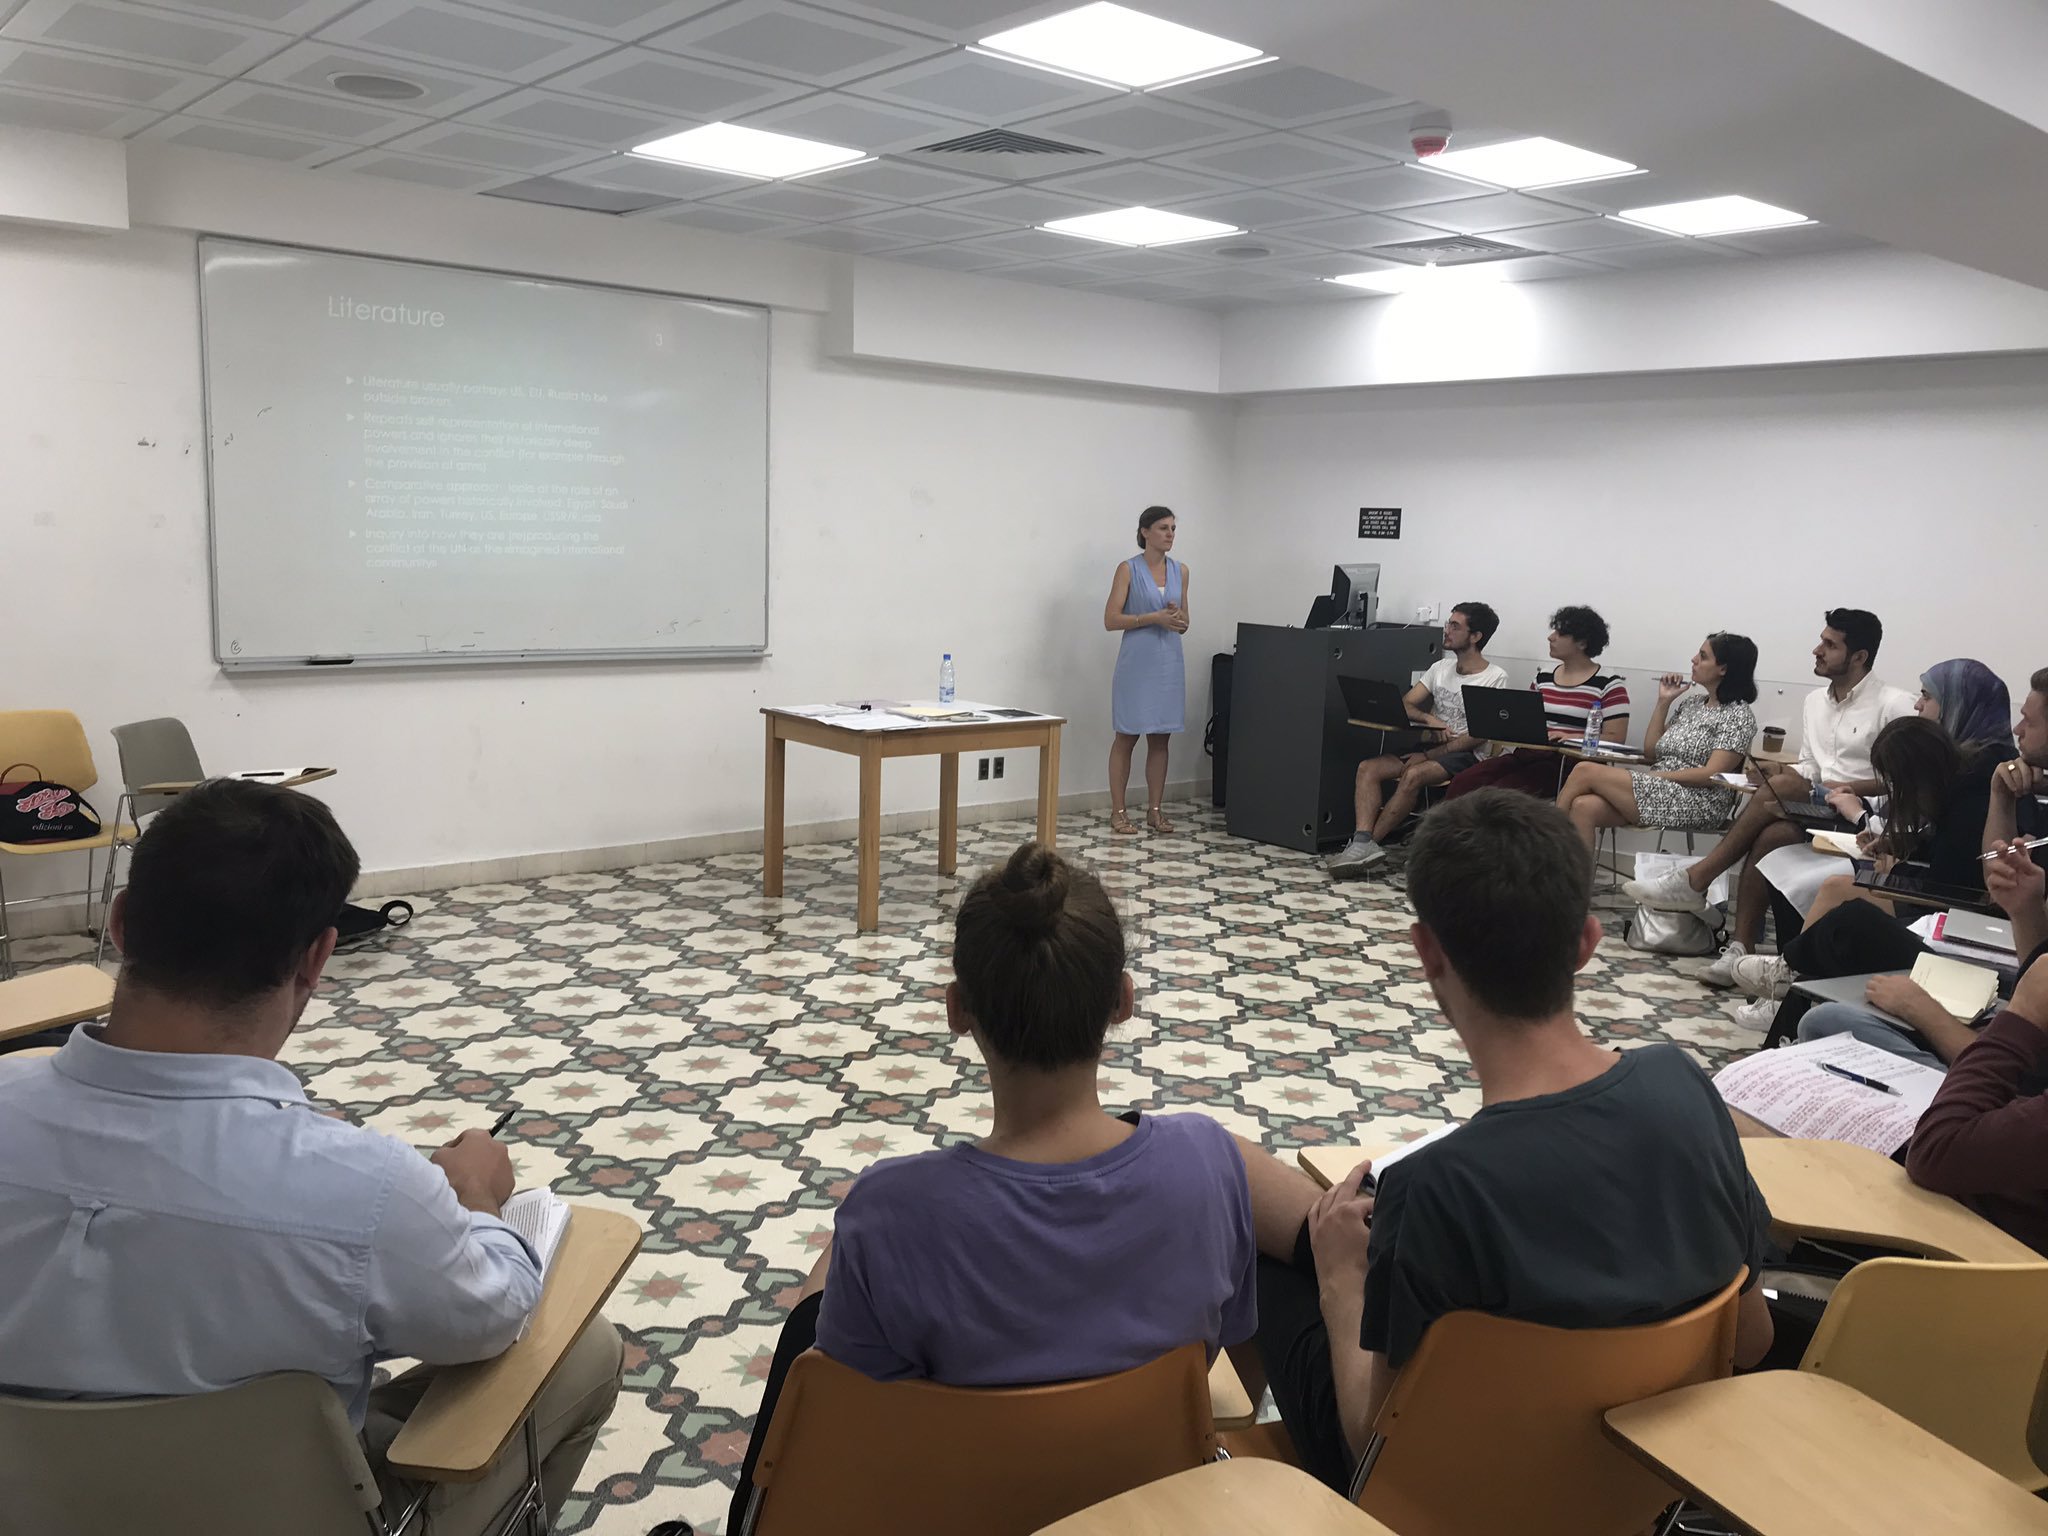 IN THE FRAMEWORK OF EUMENIA, DR. DANIELA HUBER, HEAD OF THE MEDITERRANEAN AND MIDDLE EAST PROGRAM AT THE ISTITUTO AFFARI INTERNAZIONALI, GAVE A LECTURE AT THE AMERICAN UNIVERSITY OF BEIRUT